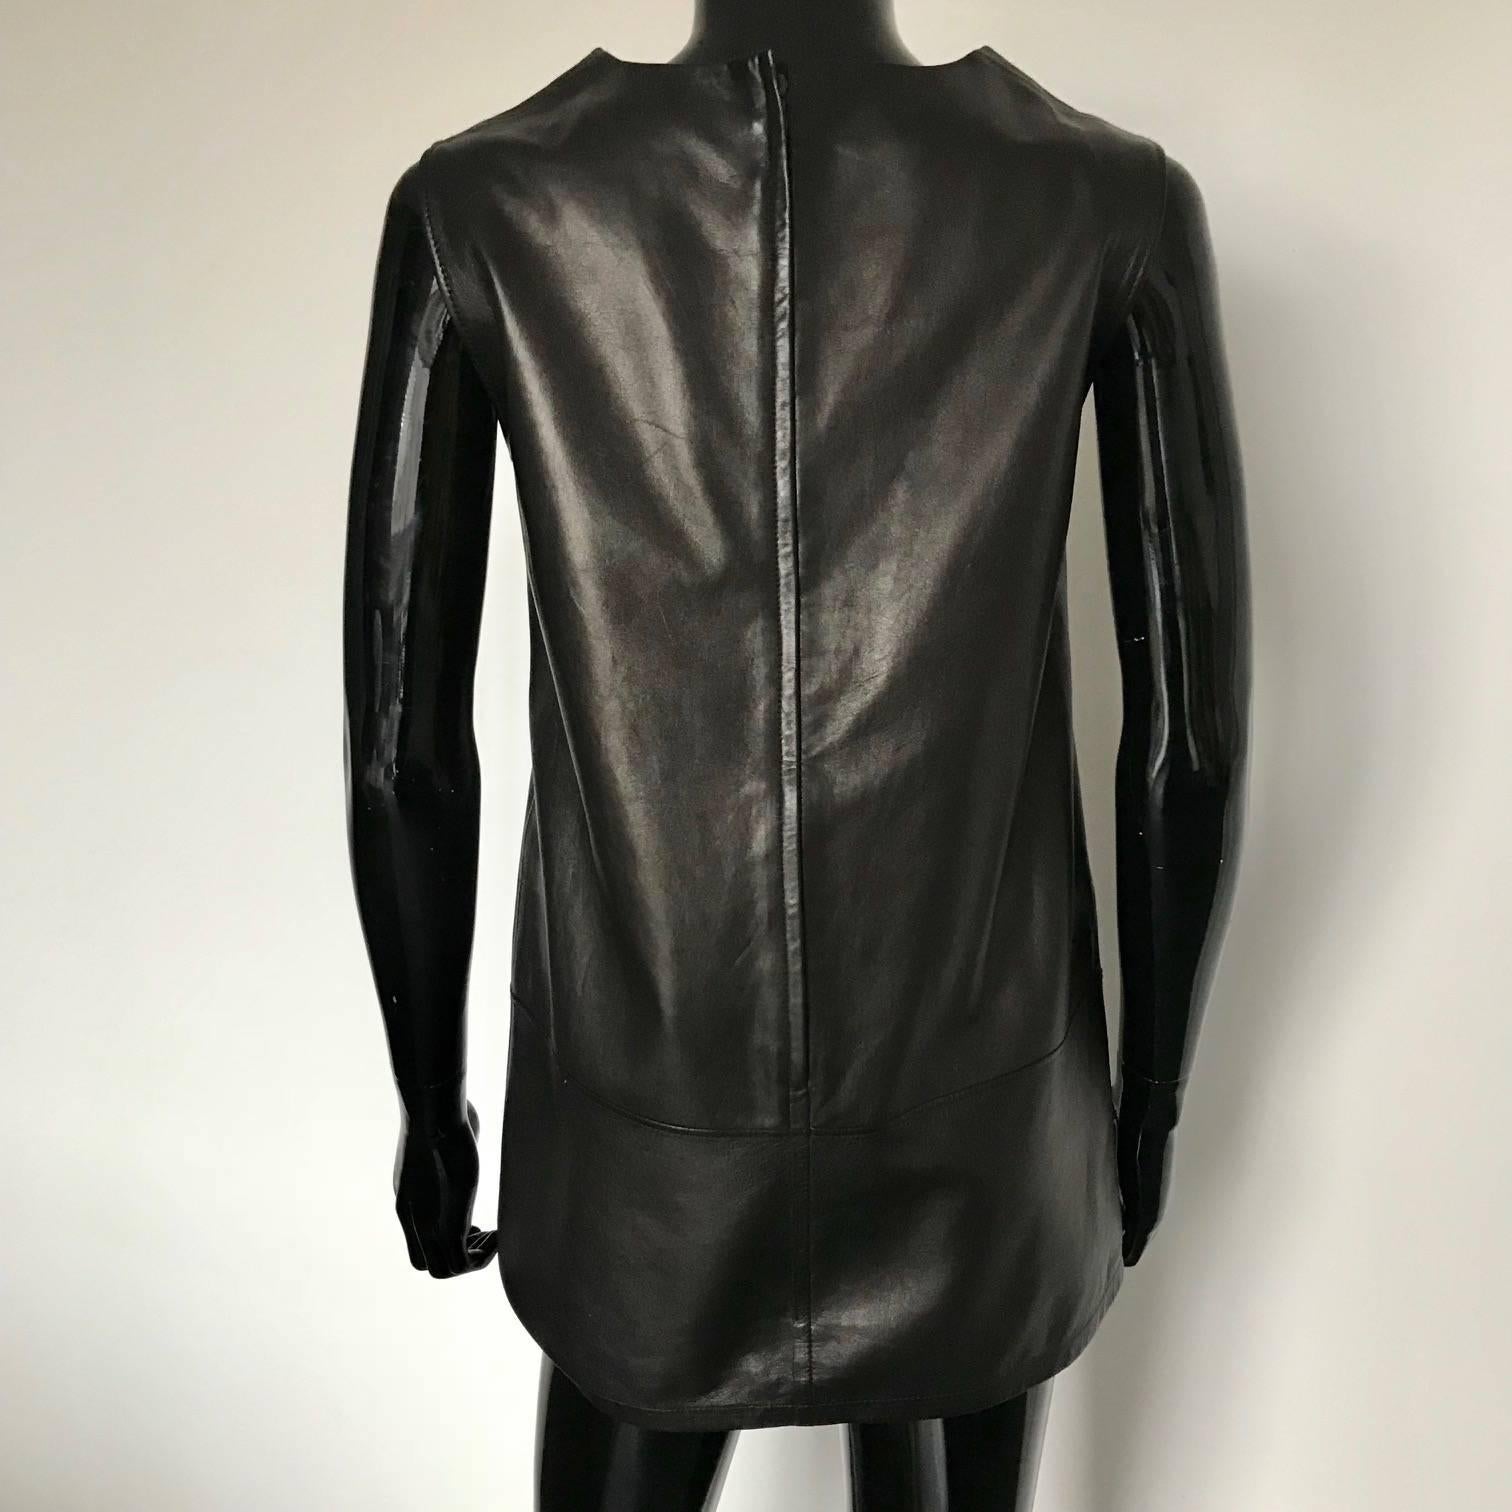 HERMES leather tunic, Circa 2000's.
Dark Brown Lamb leather of excellent quality.
Very good condition with the original label and silk lining.